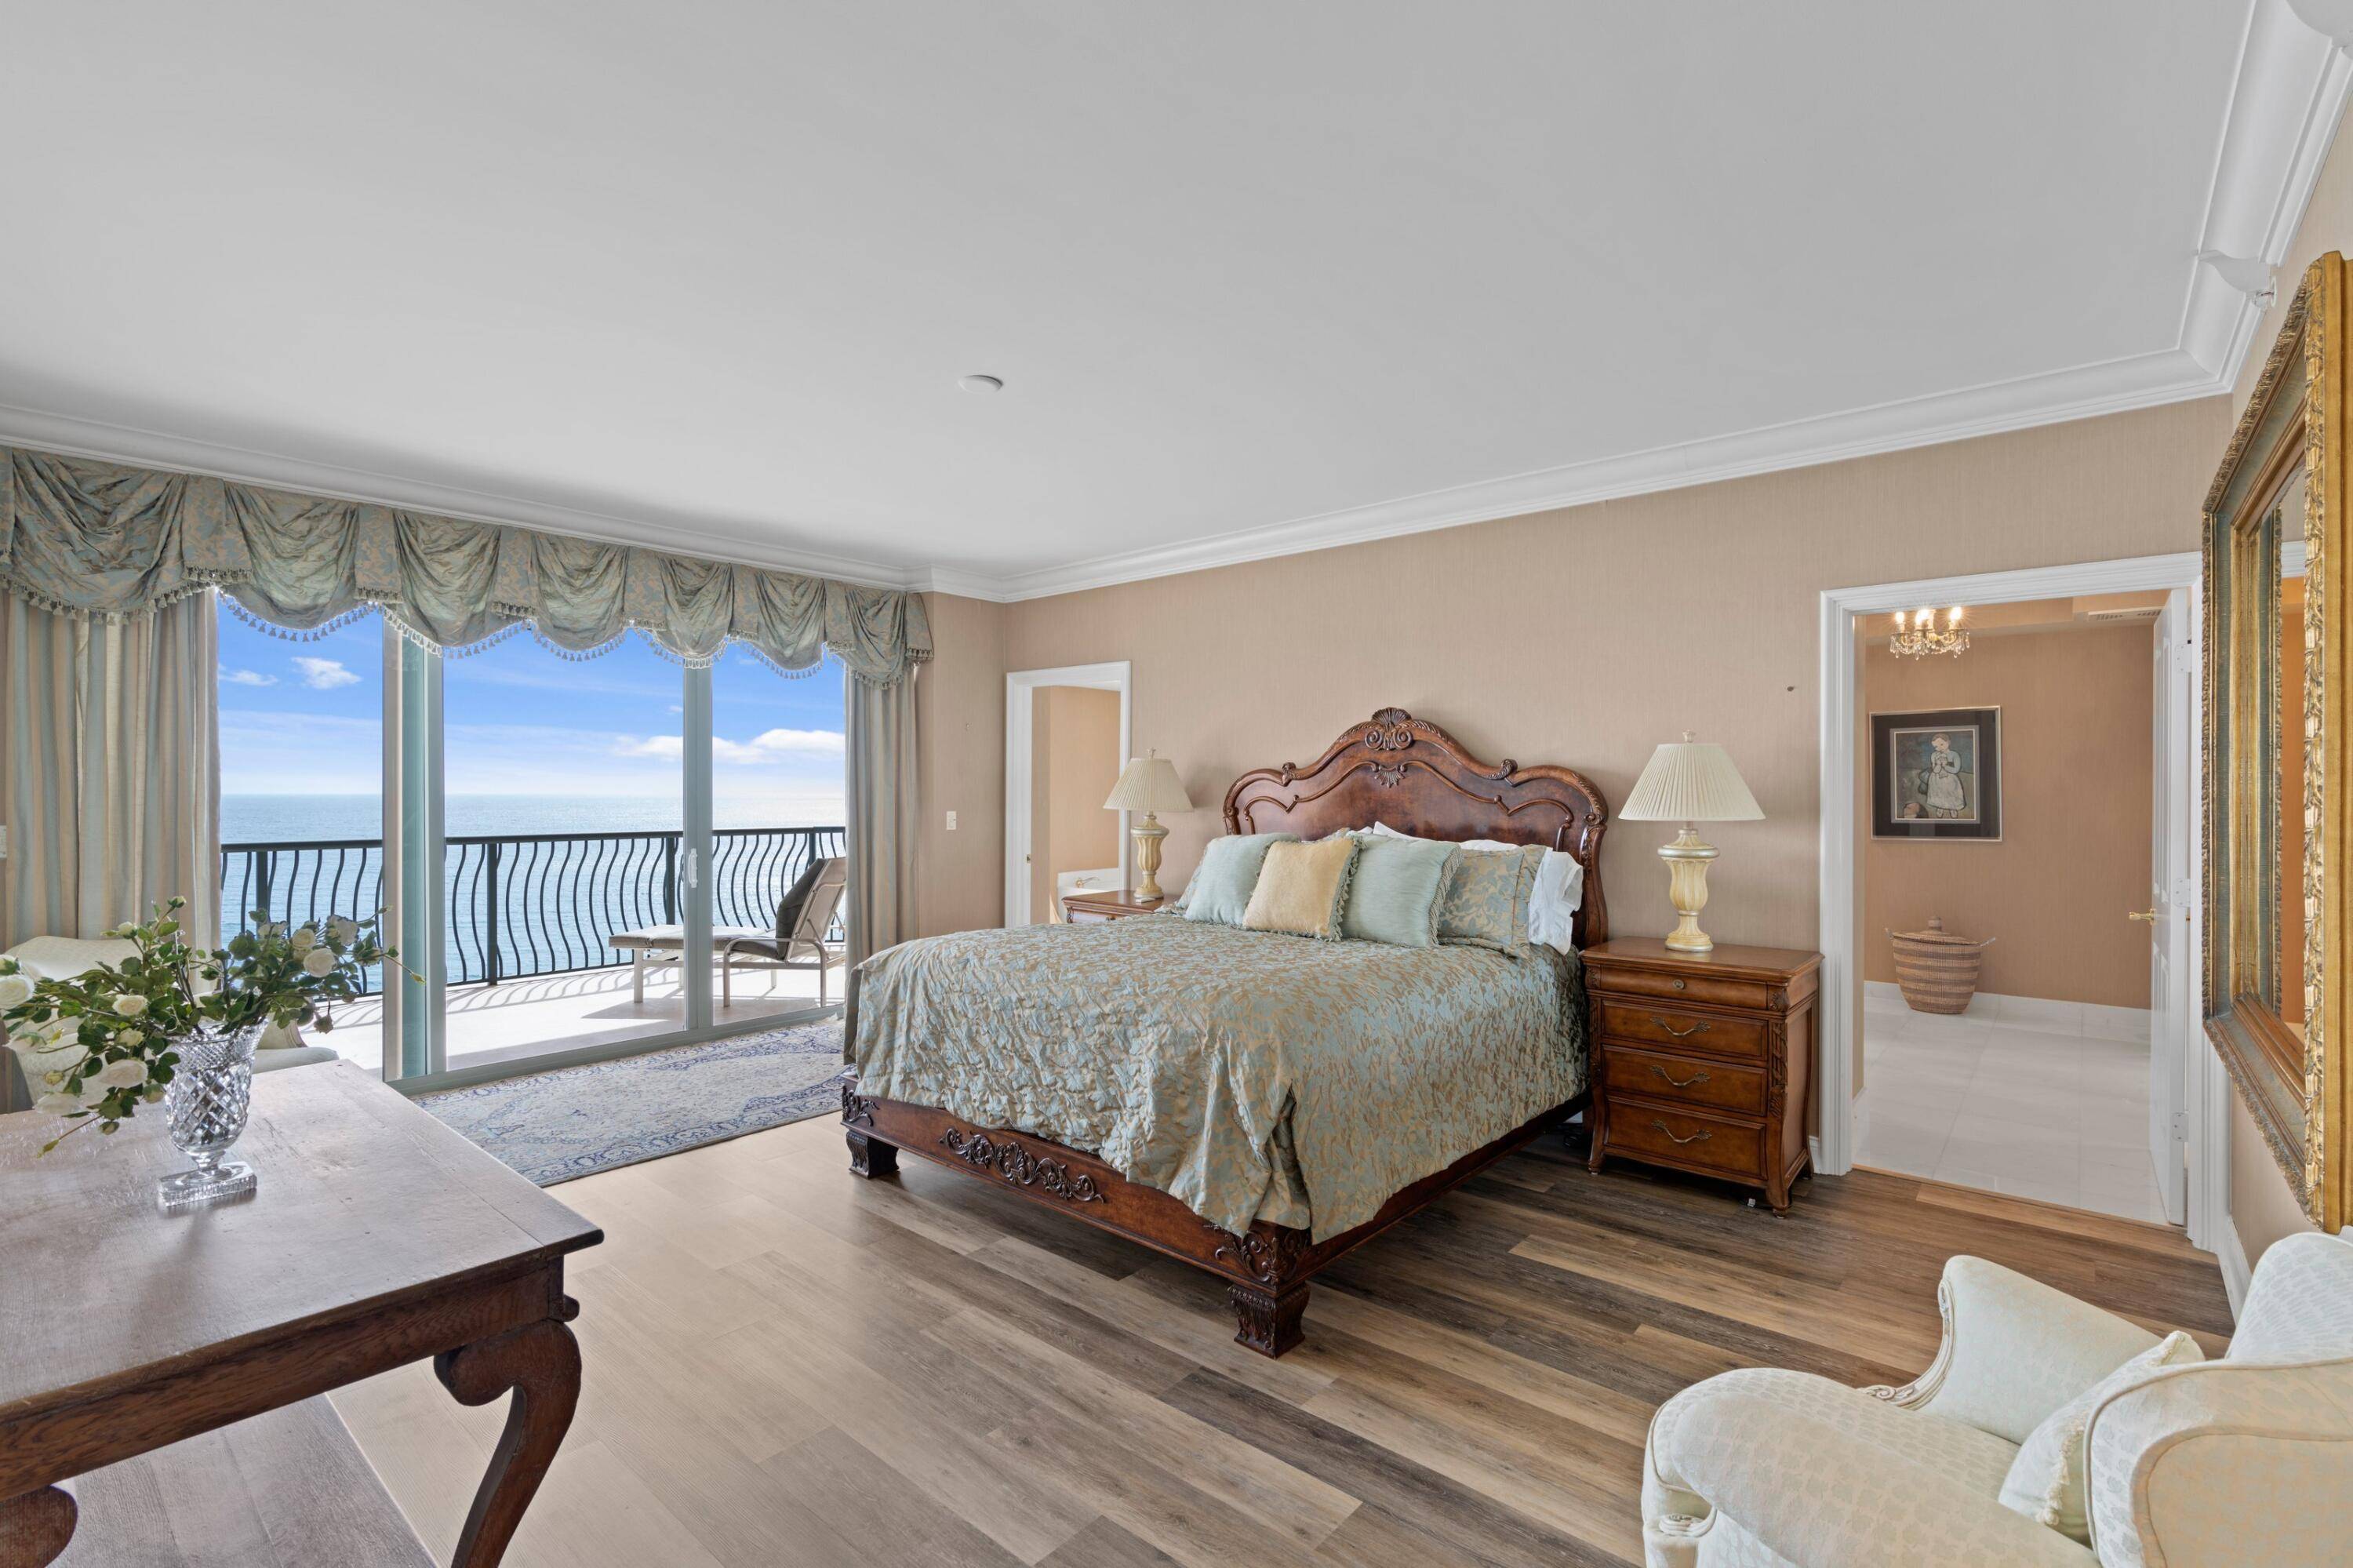 Discover coastal elegance at its finest in this 3 bed, 3.